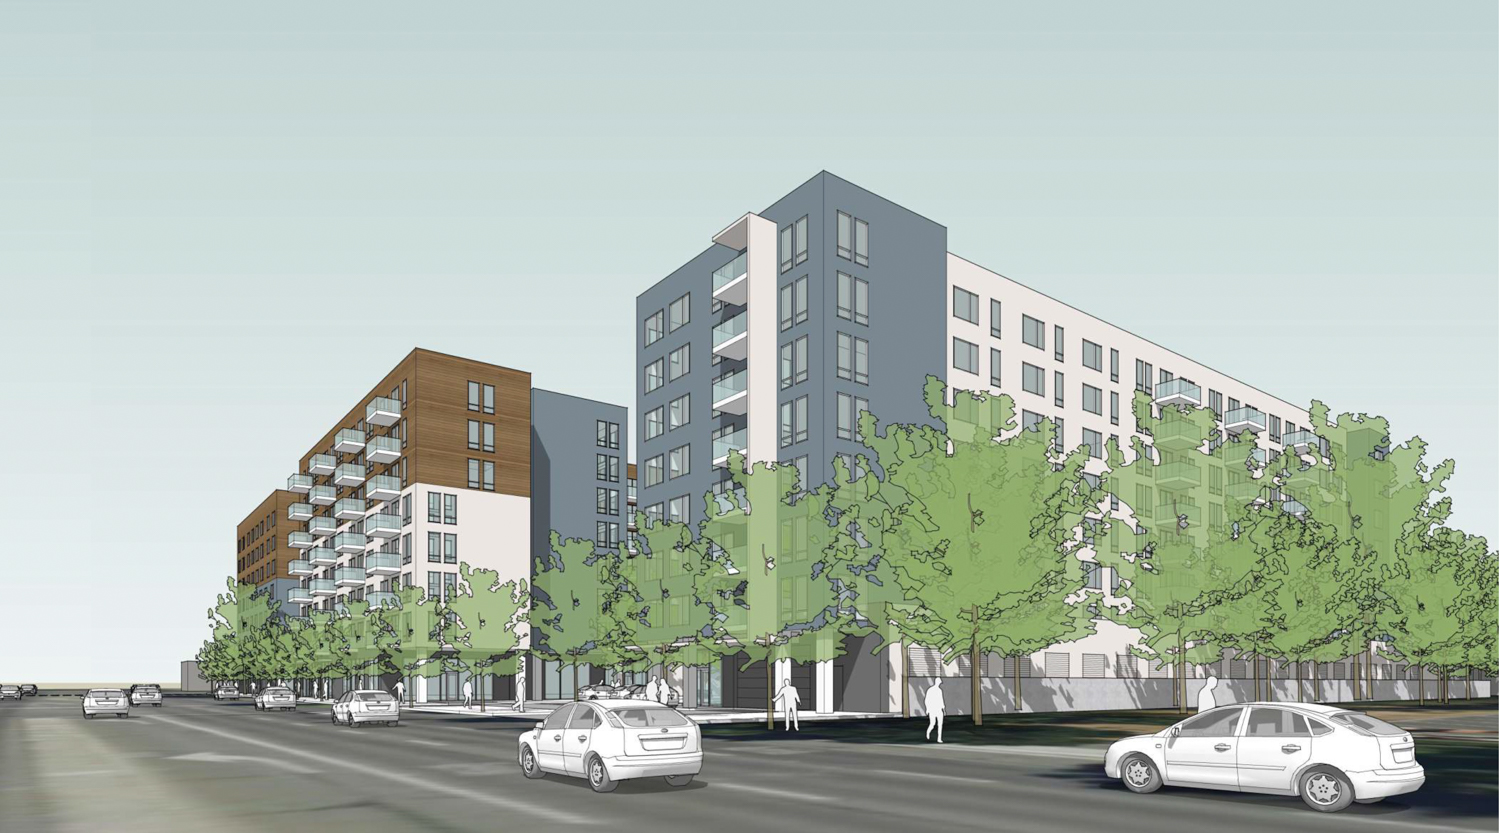 3400 El Camino Real view from the street, rendering by Lowney Architecture